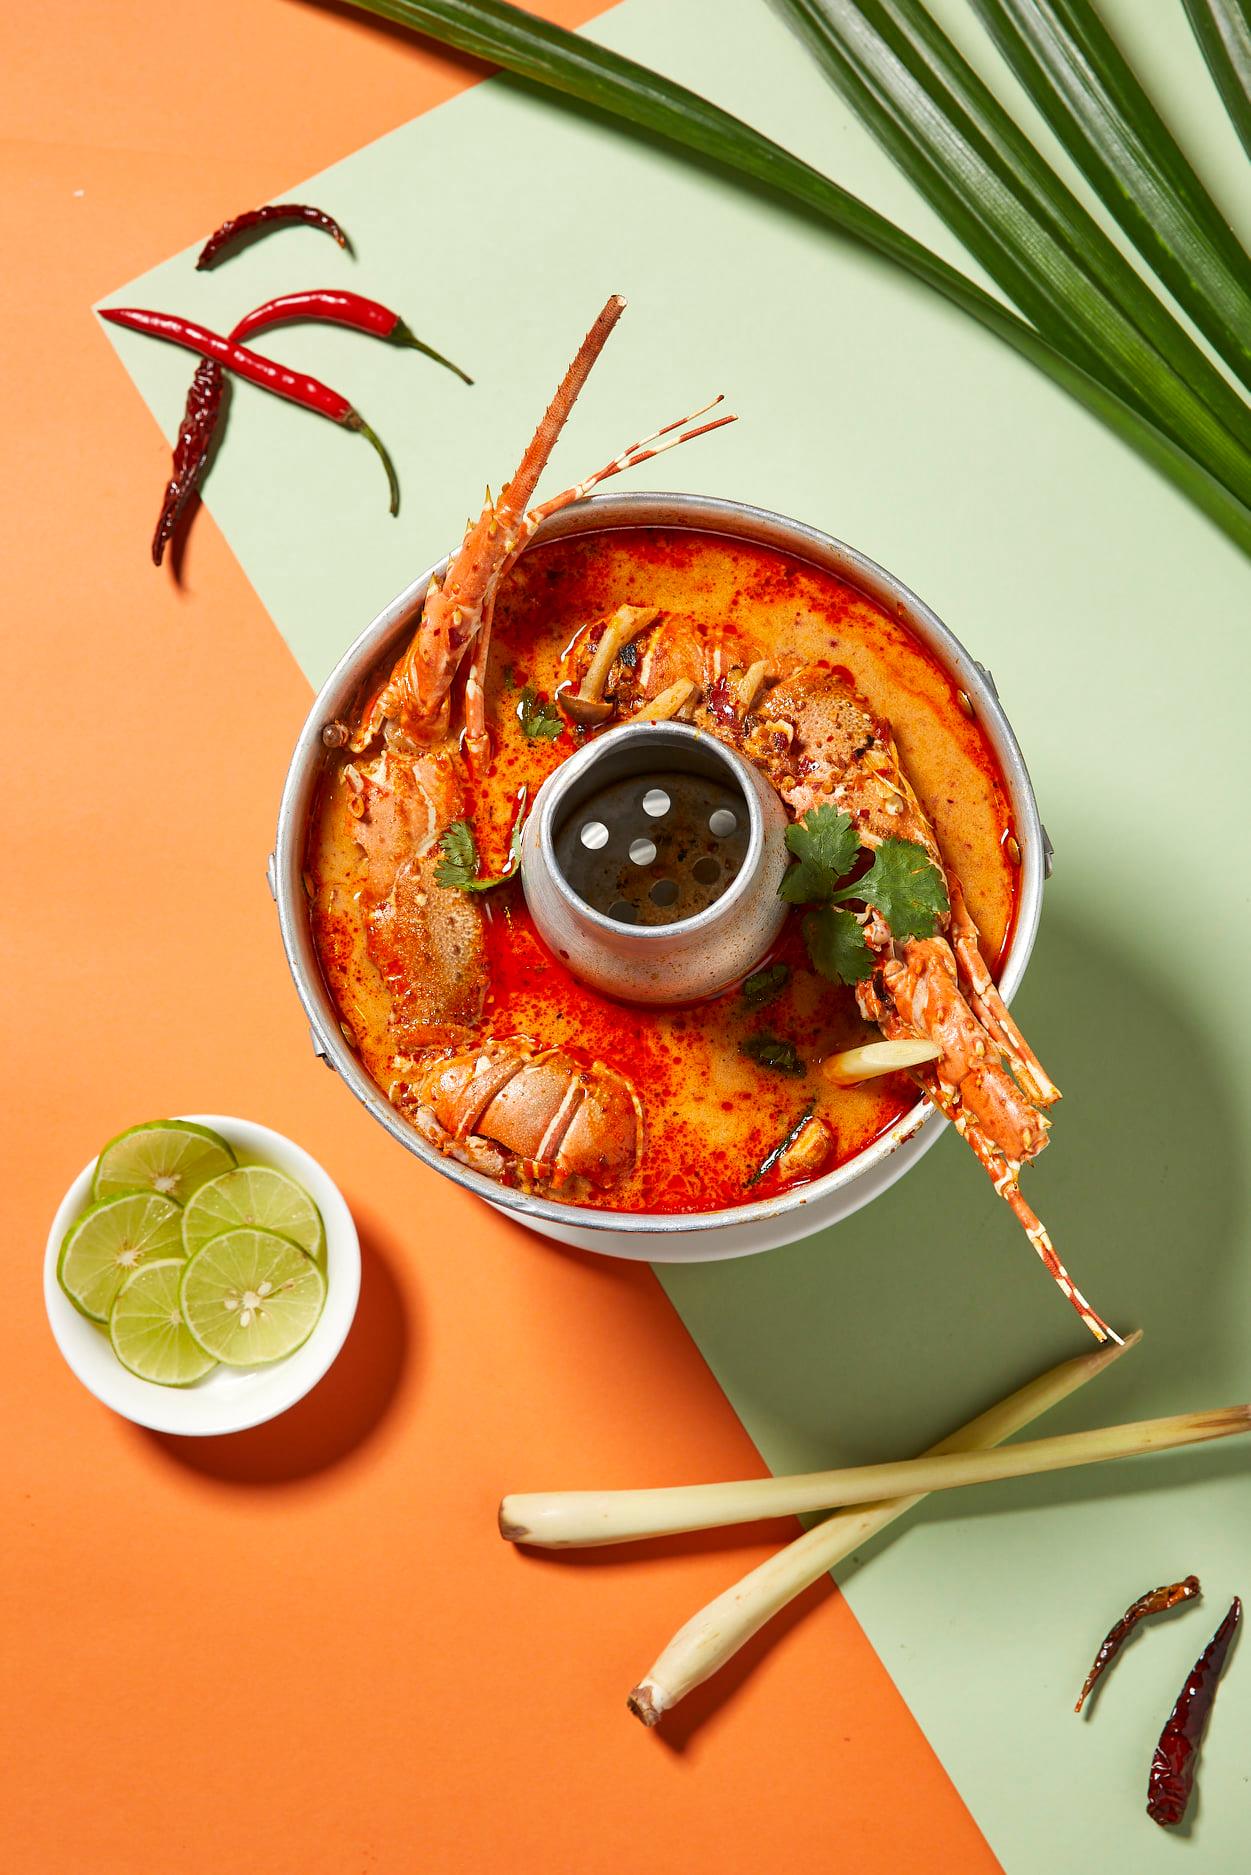 The Whole Lobster Tom Yum Hot Pot🌶 ~~ Start off your week right with a hint of refreshingly spiciness! 